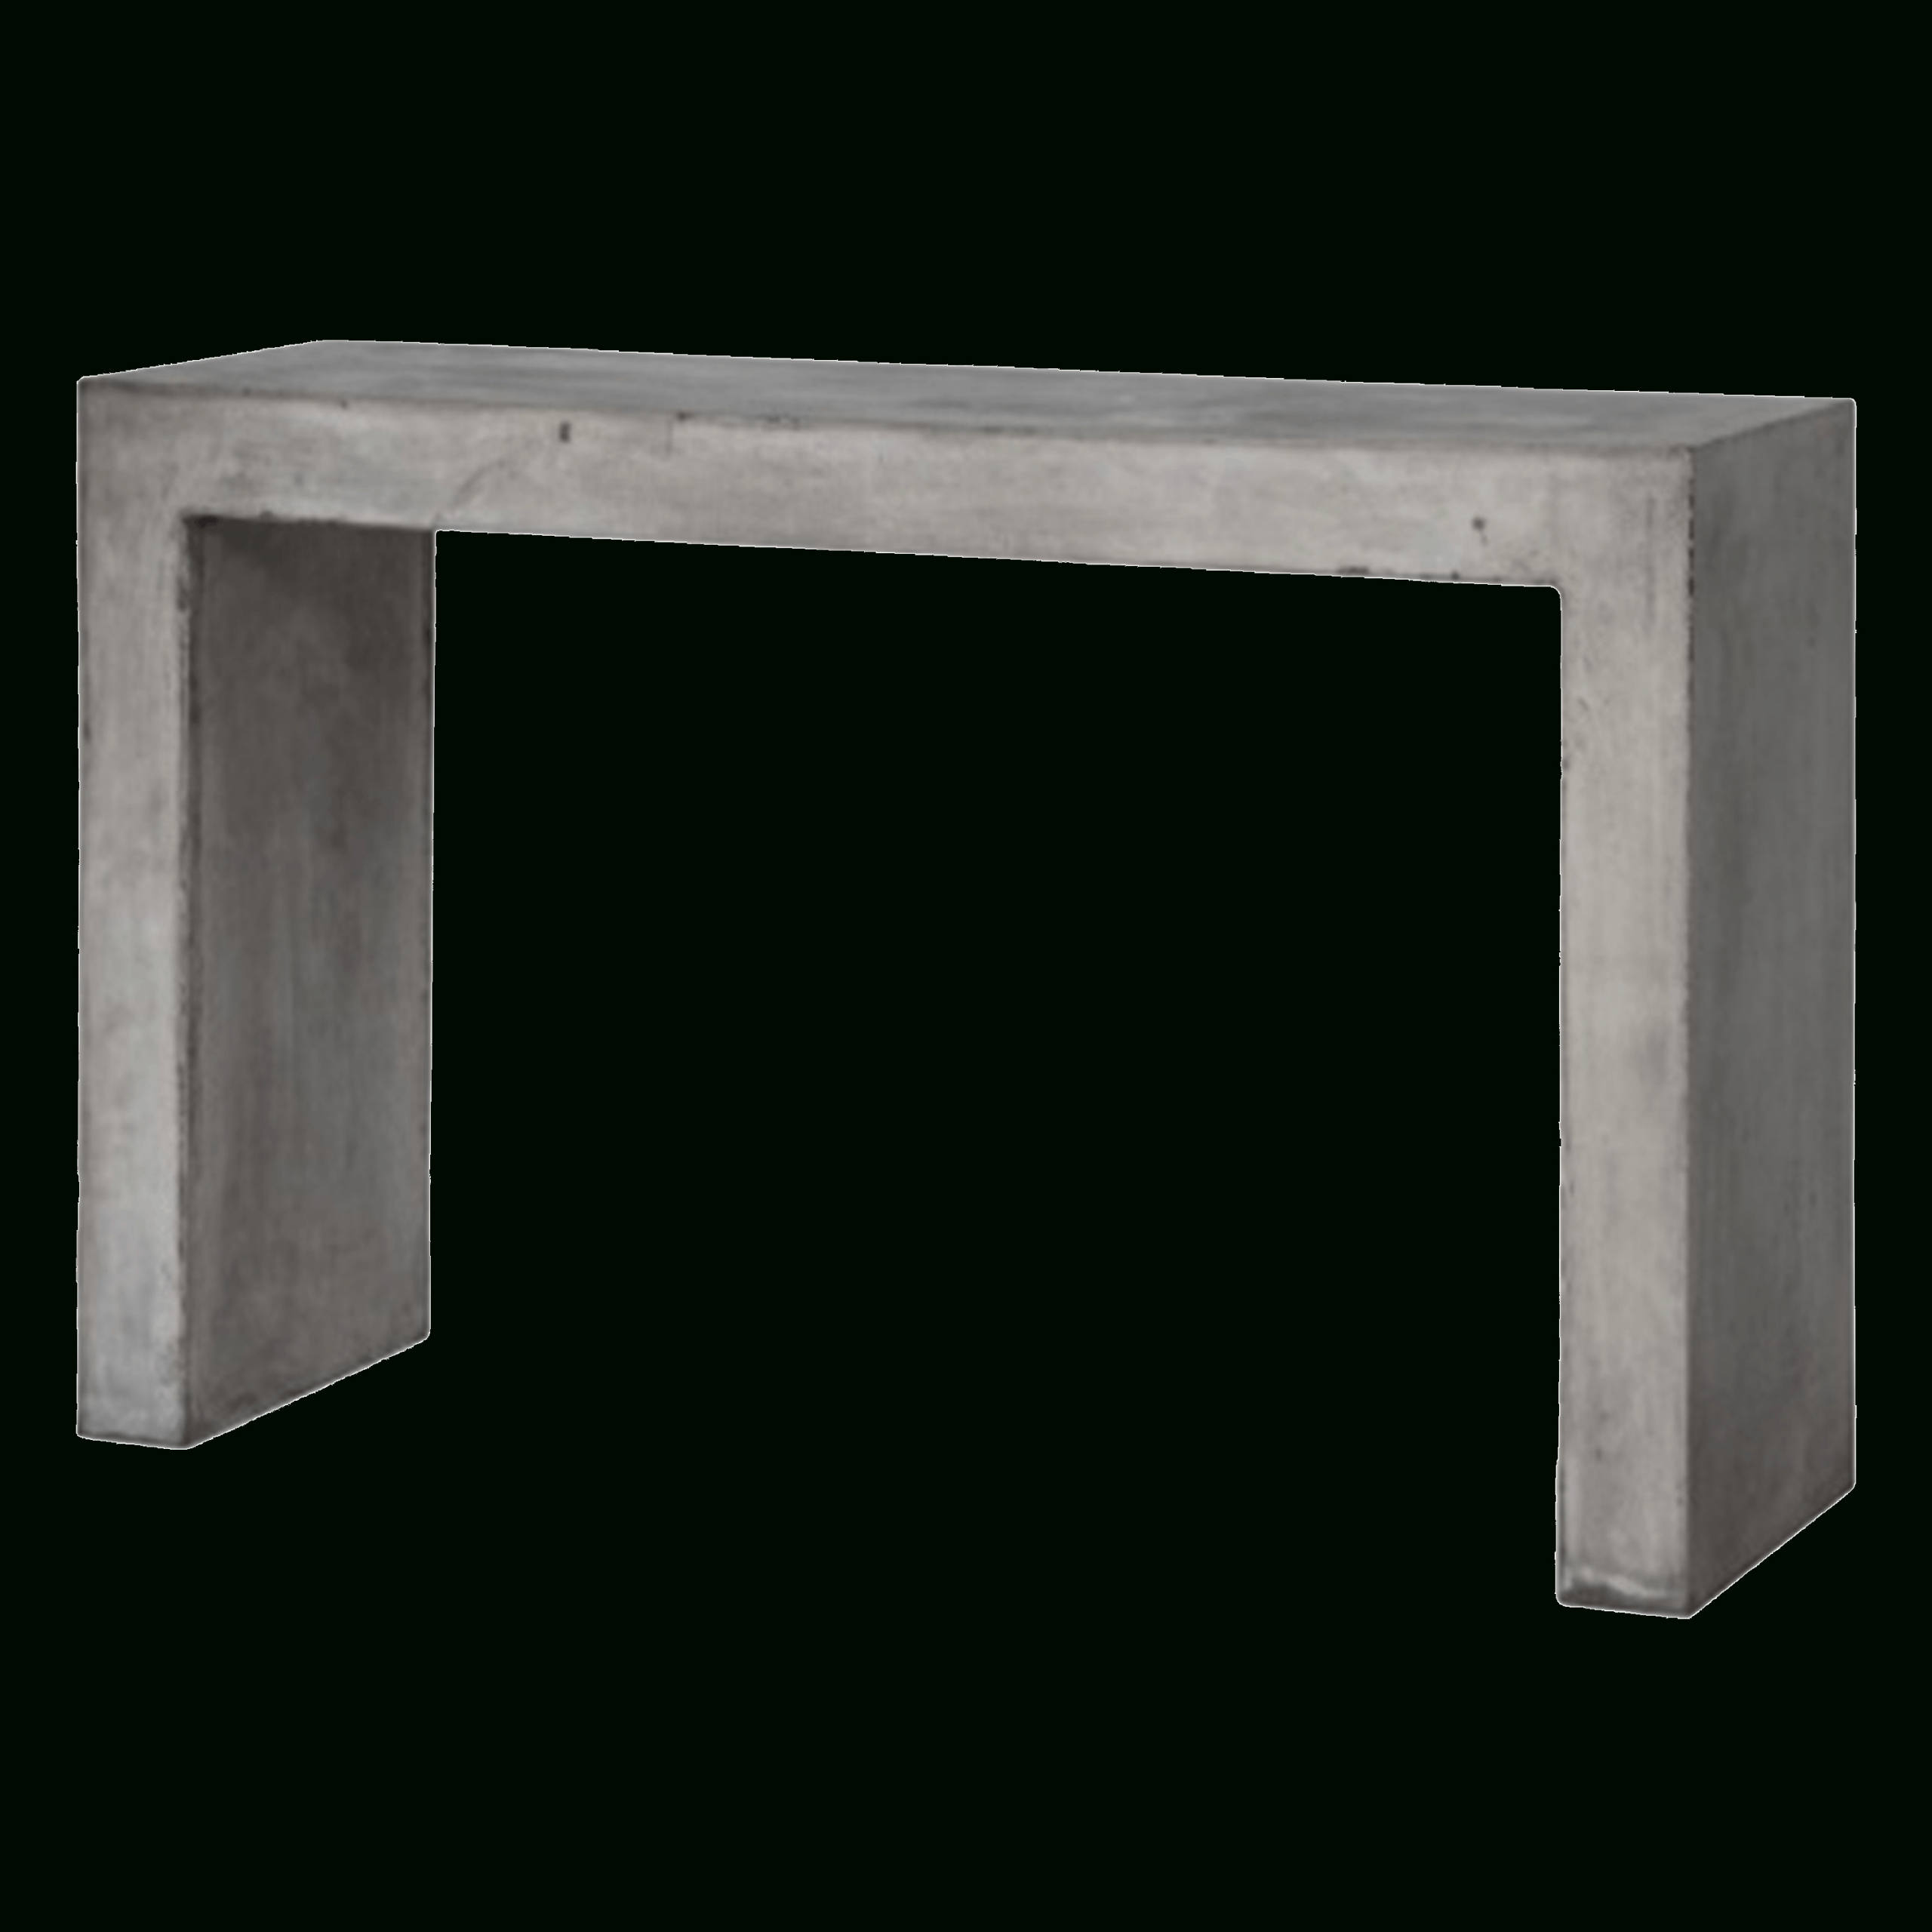 Concrete Grey & White Desk Dressing Console Table Desk Storage Modern Pertaining To Modern Concrete Console Tables (View 4 of 20)